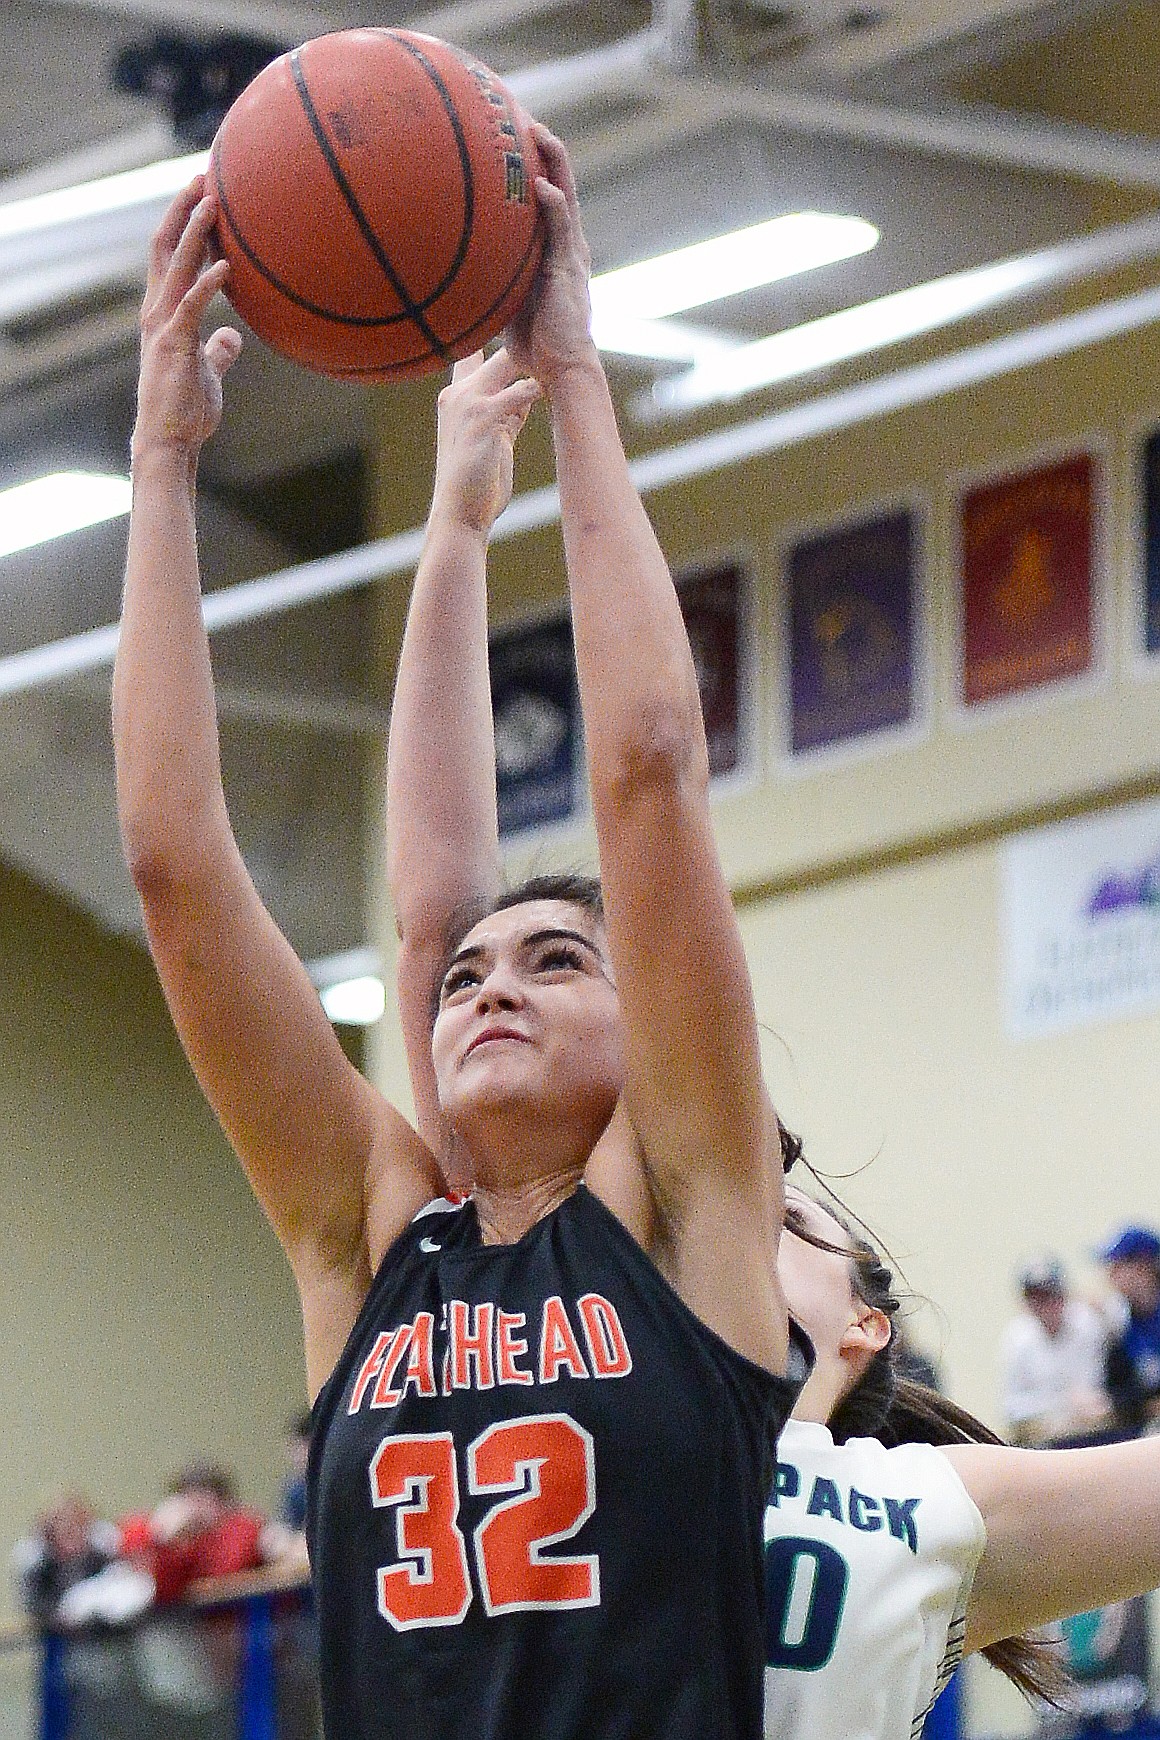 Flathead's Taylor Henley (32) grabs a rebound over Glacier's Raley Shirey (40) during a crosstown matchup at Glacier High School on Friday. (Casey Kreider/Daily Inter Lake)